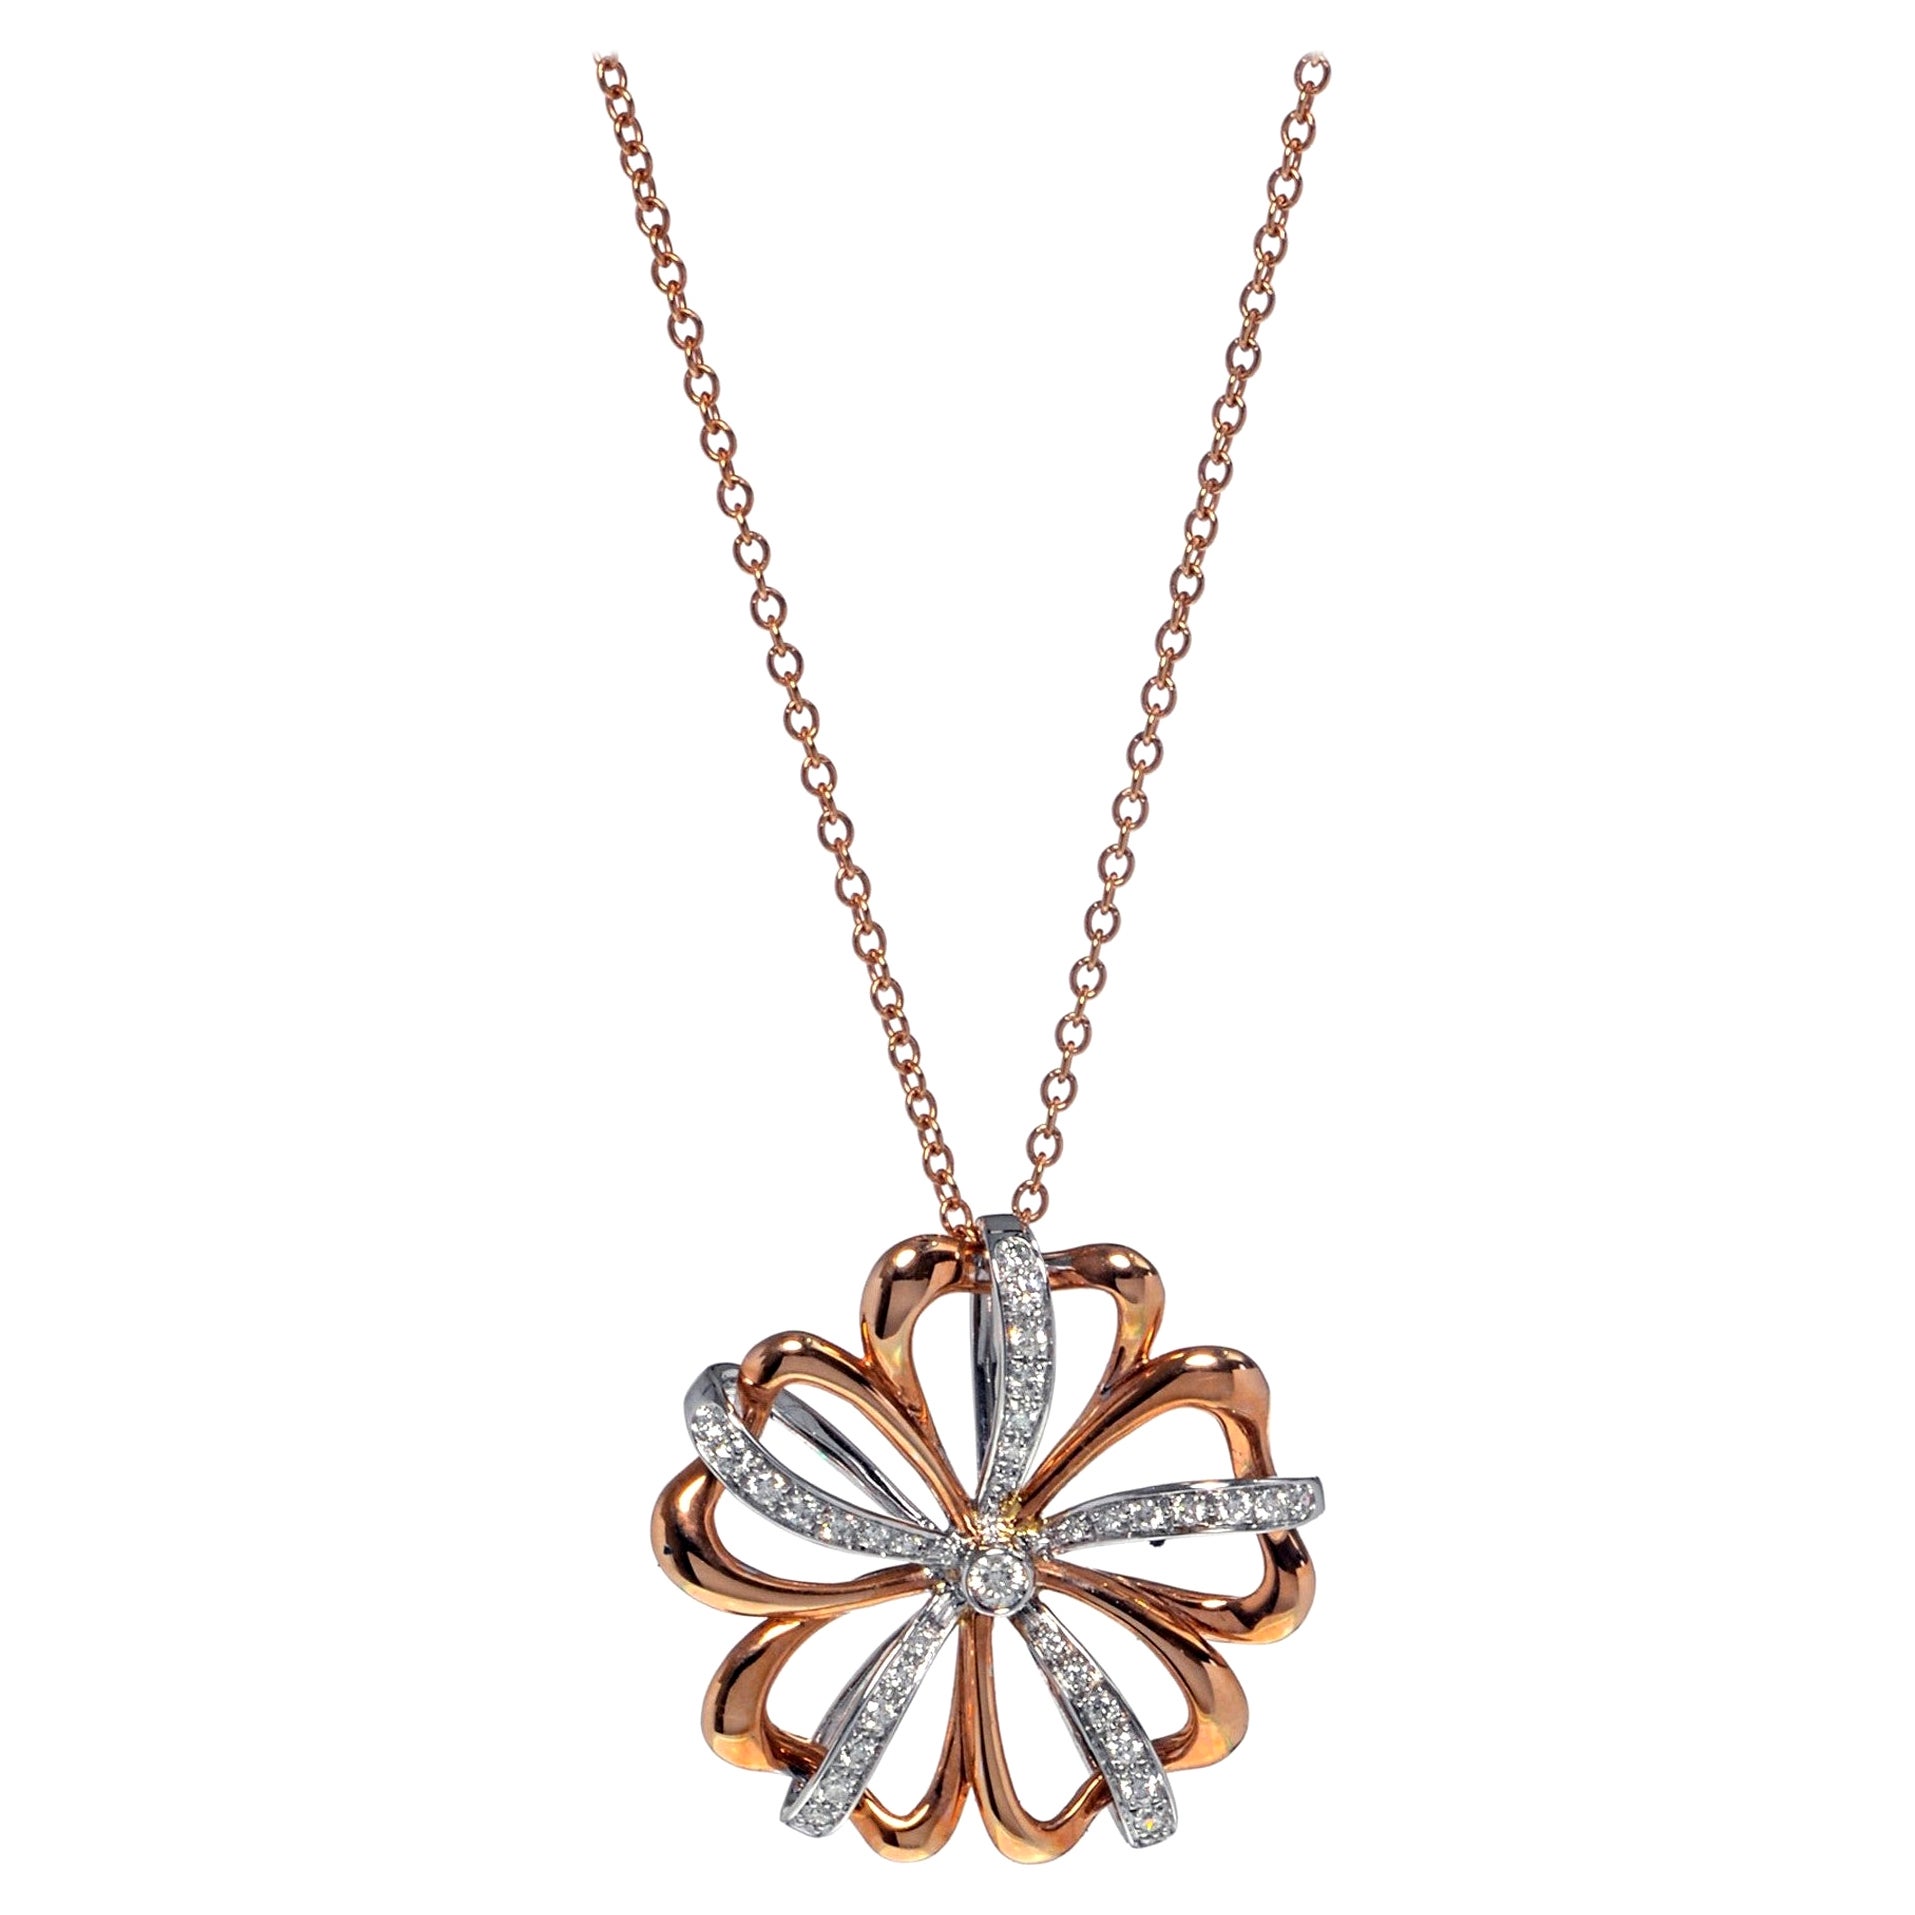 Luca Carati Flower Pendant Necklace 18K Rose & White Gold 0.39Cttw For Sale